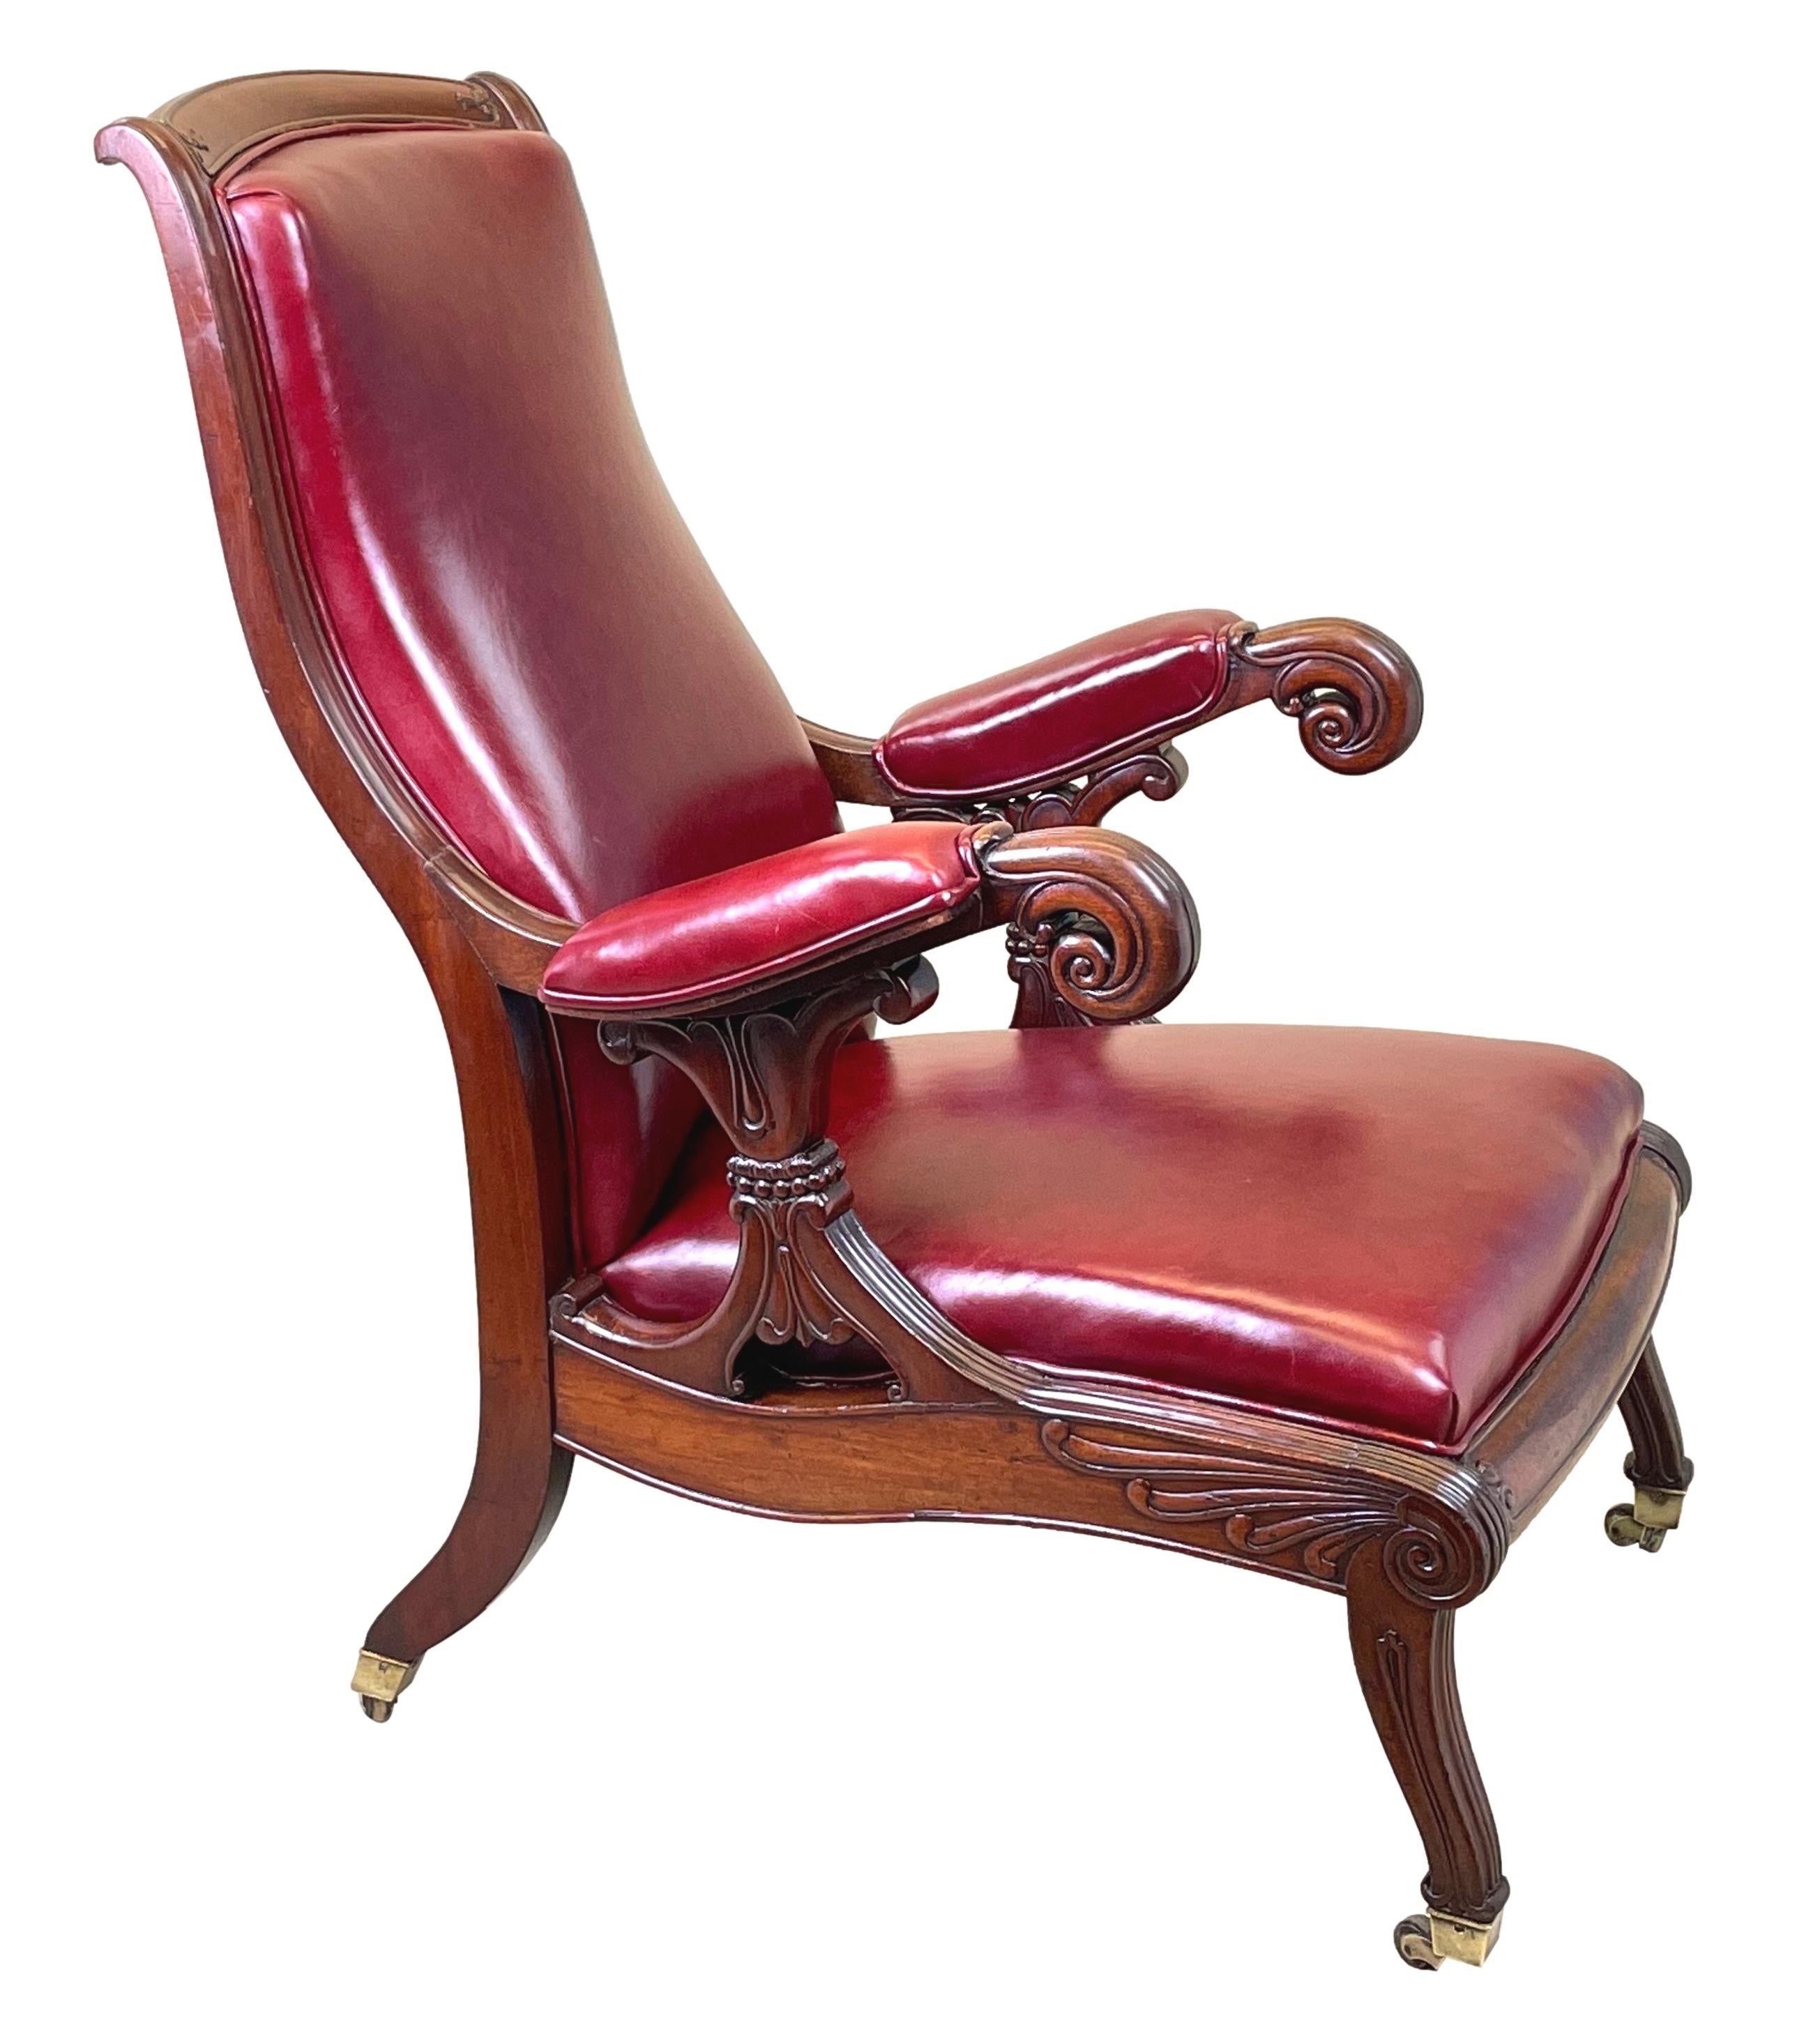 19th Century Mahogany Leather Library Chair In Good Condition For Sale In Bedfordshire, GB